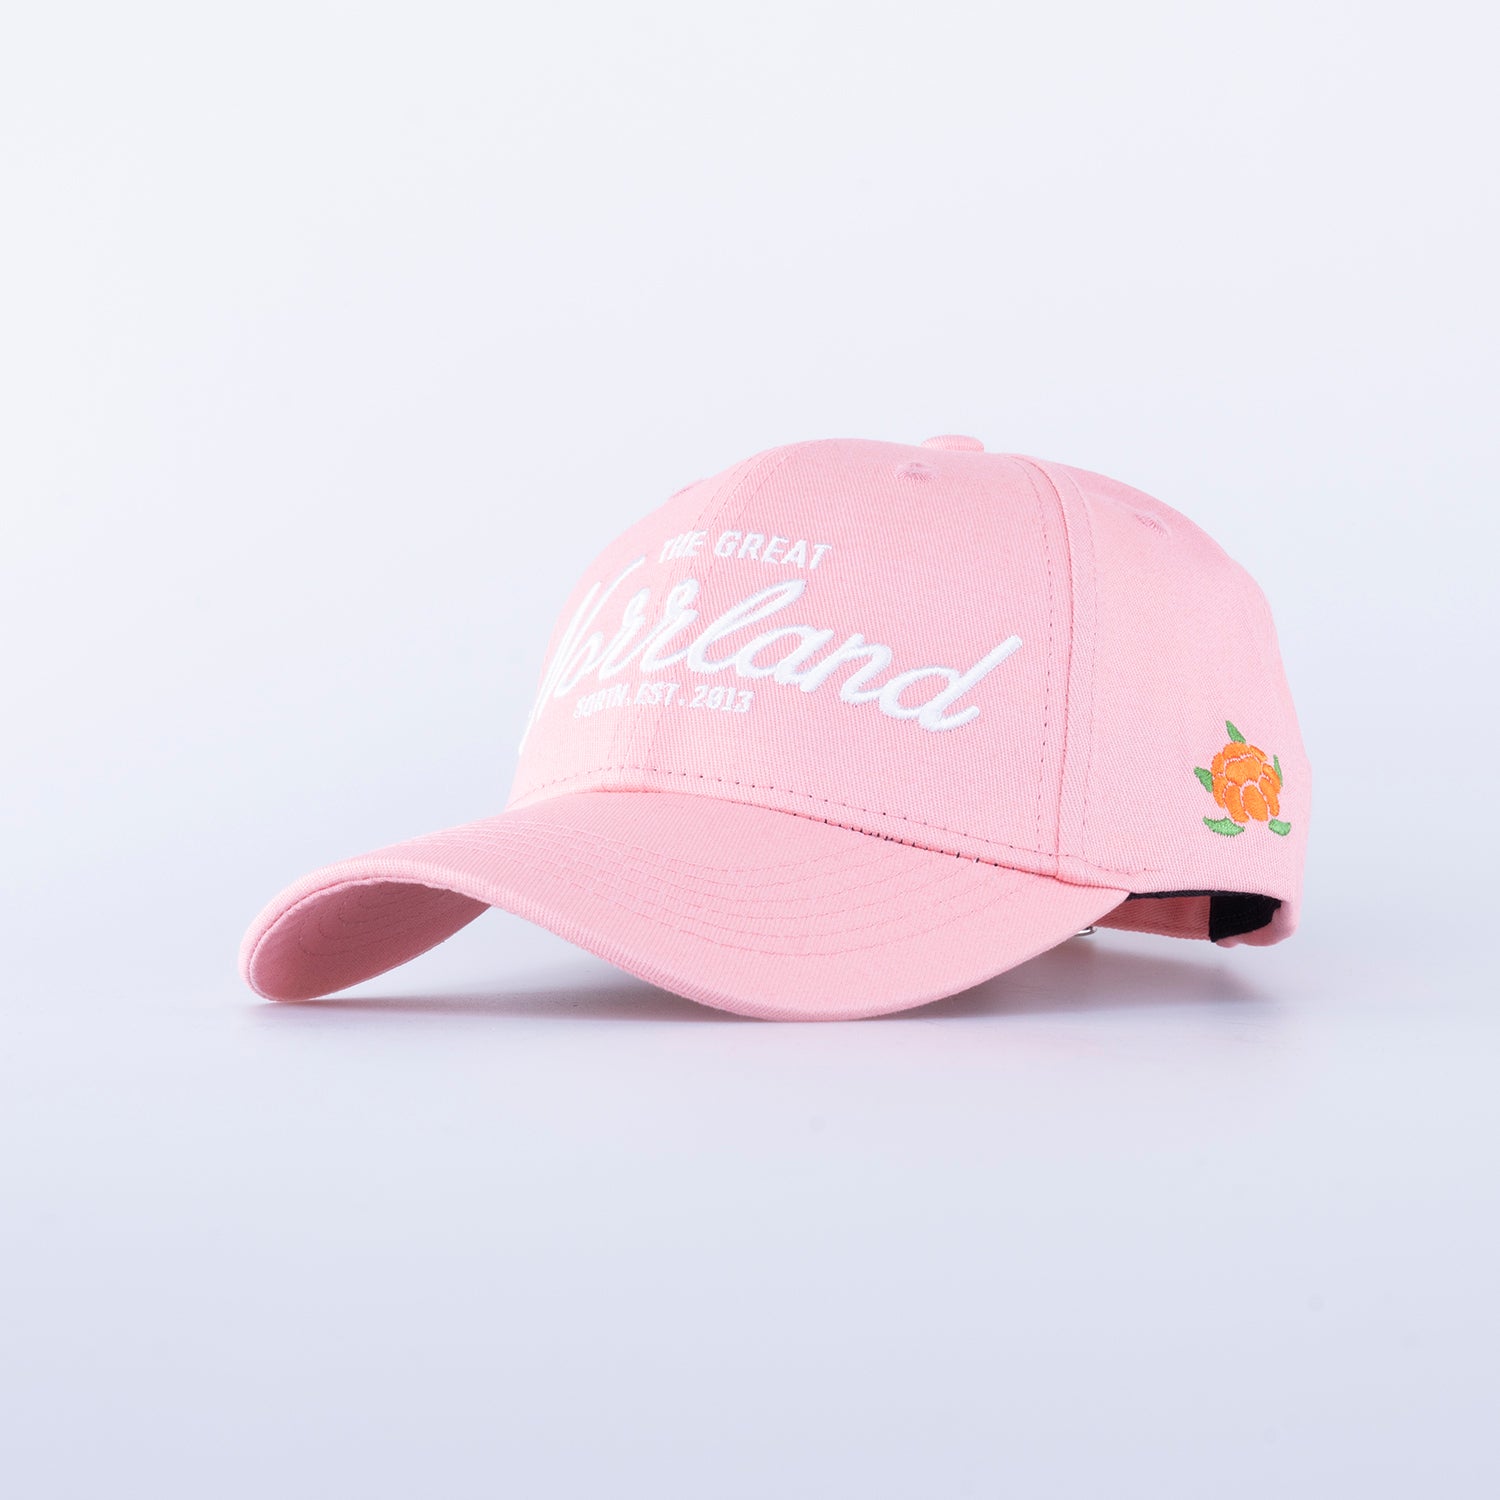 GREAT NORRLAND CAP - HOOKED PINK